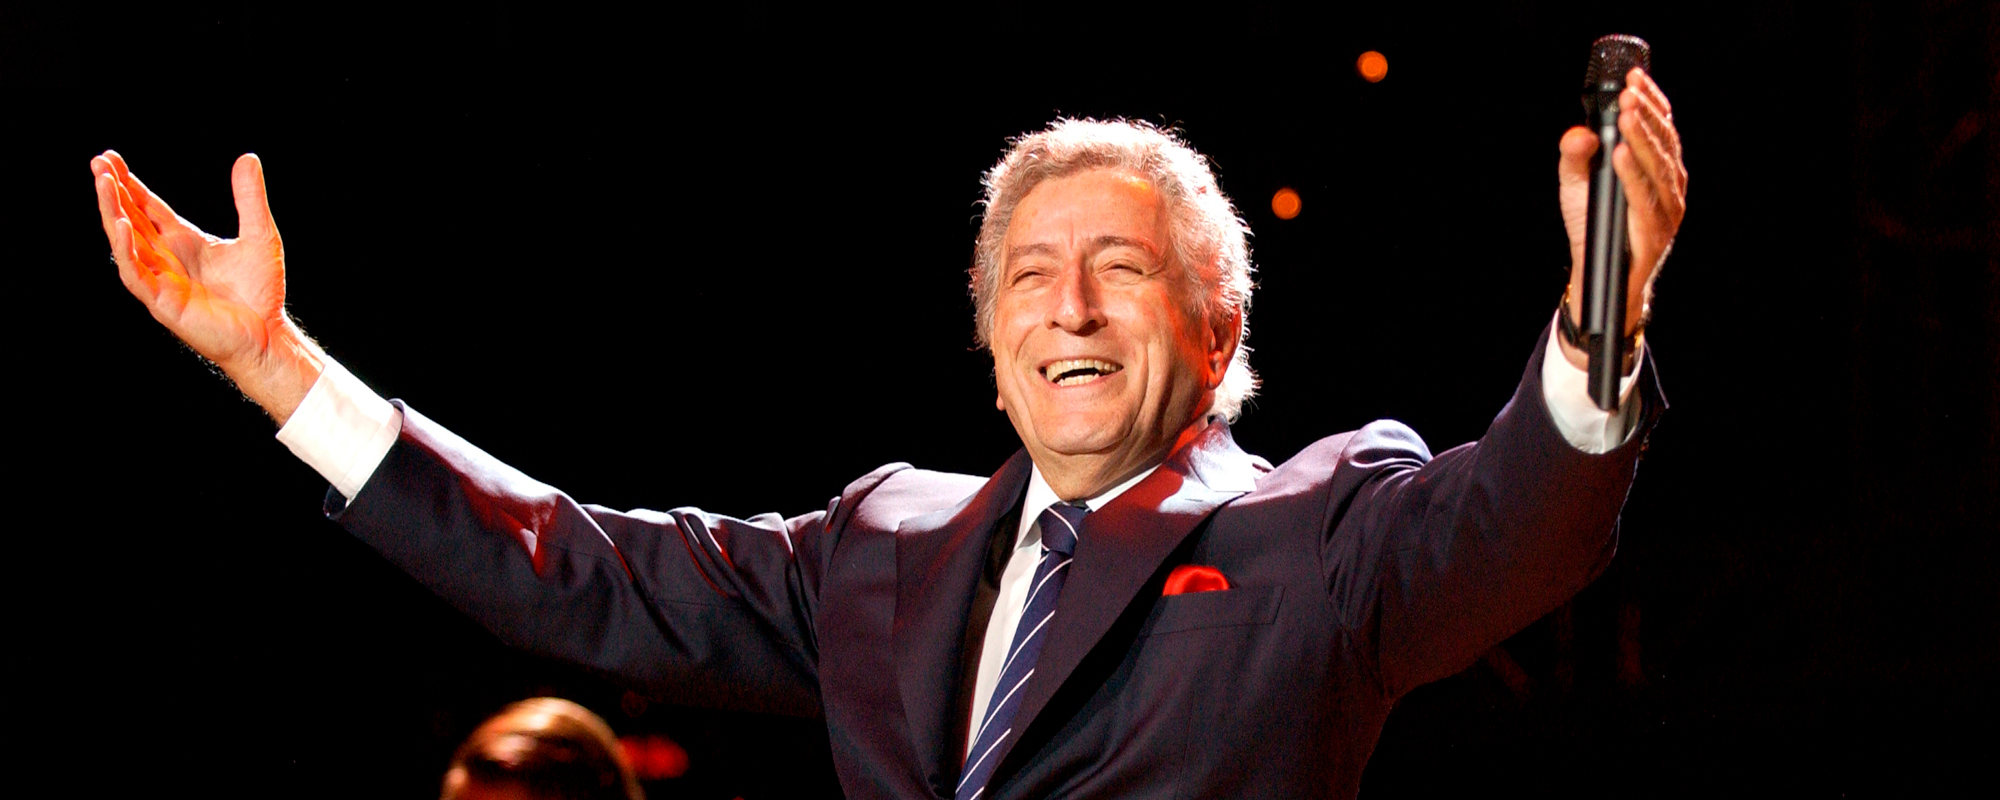 5 of Tony Bennett’s Most Powerful Performances from His Hometown of New York City